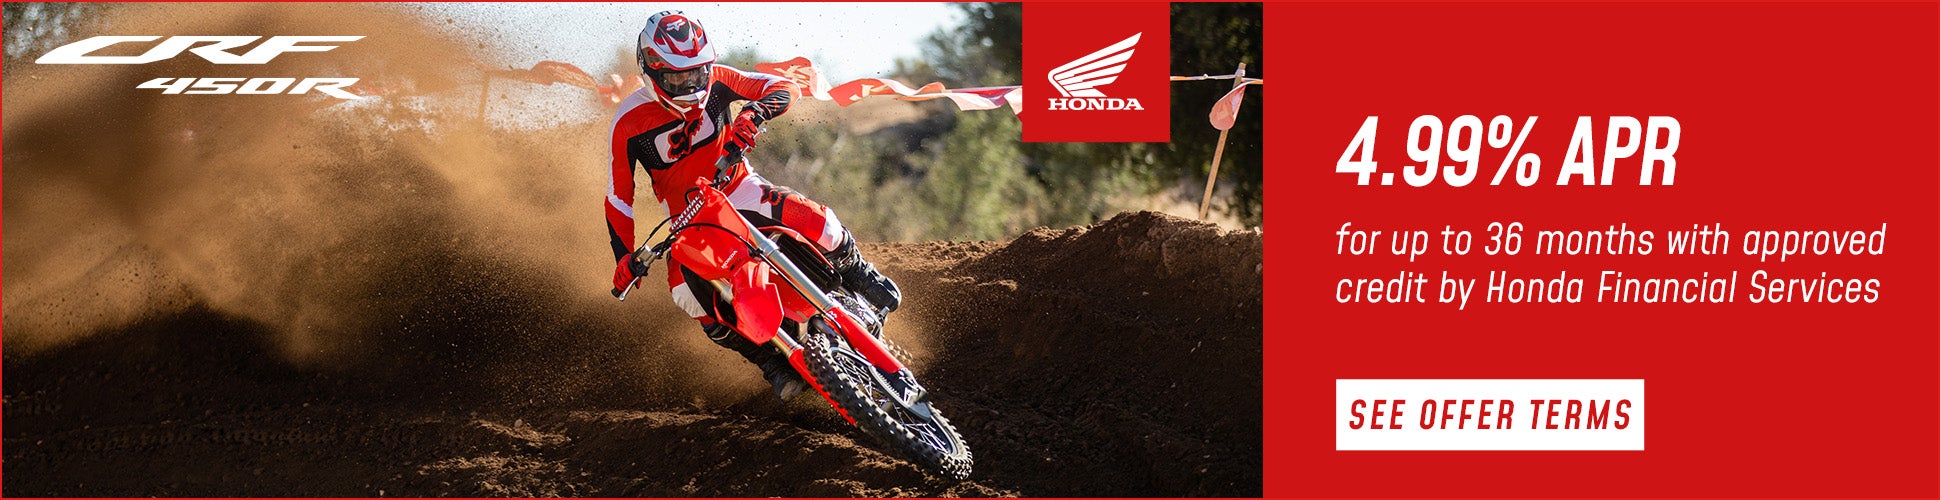 special financing on select Honda atv motorcycle and sxs